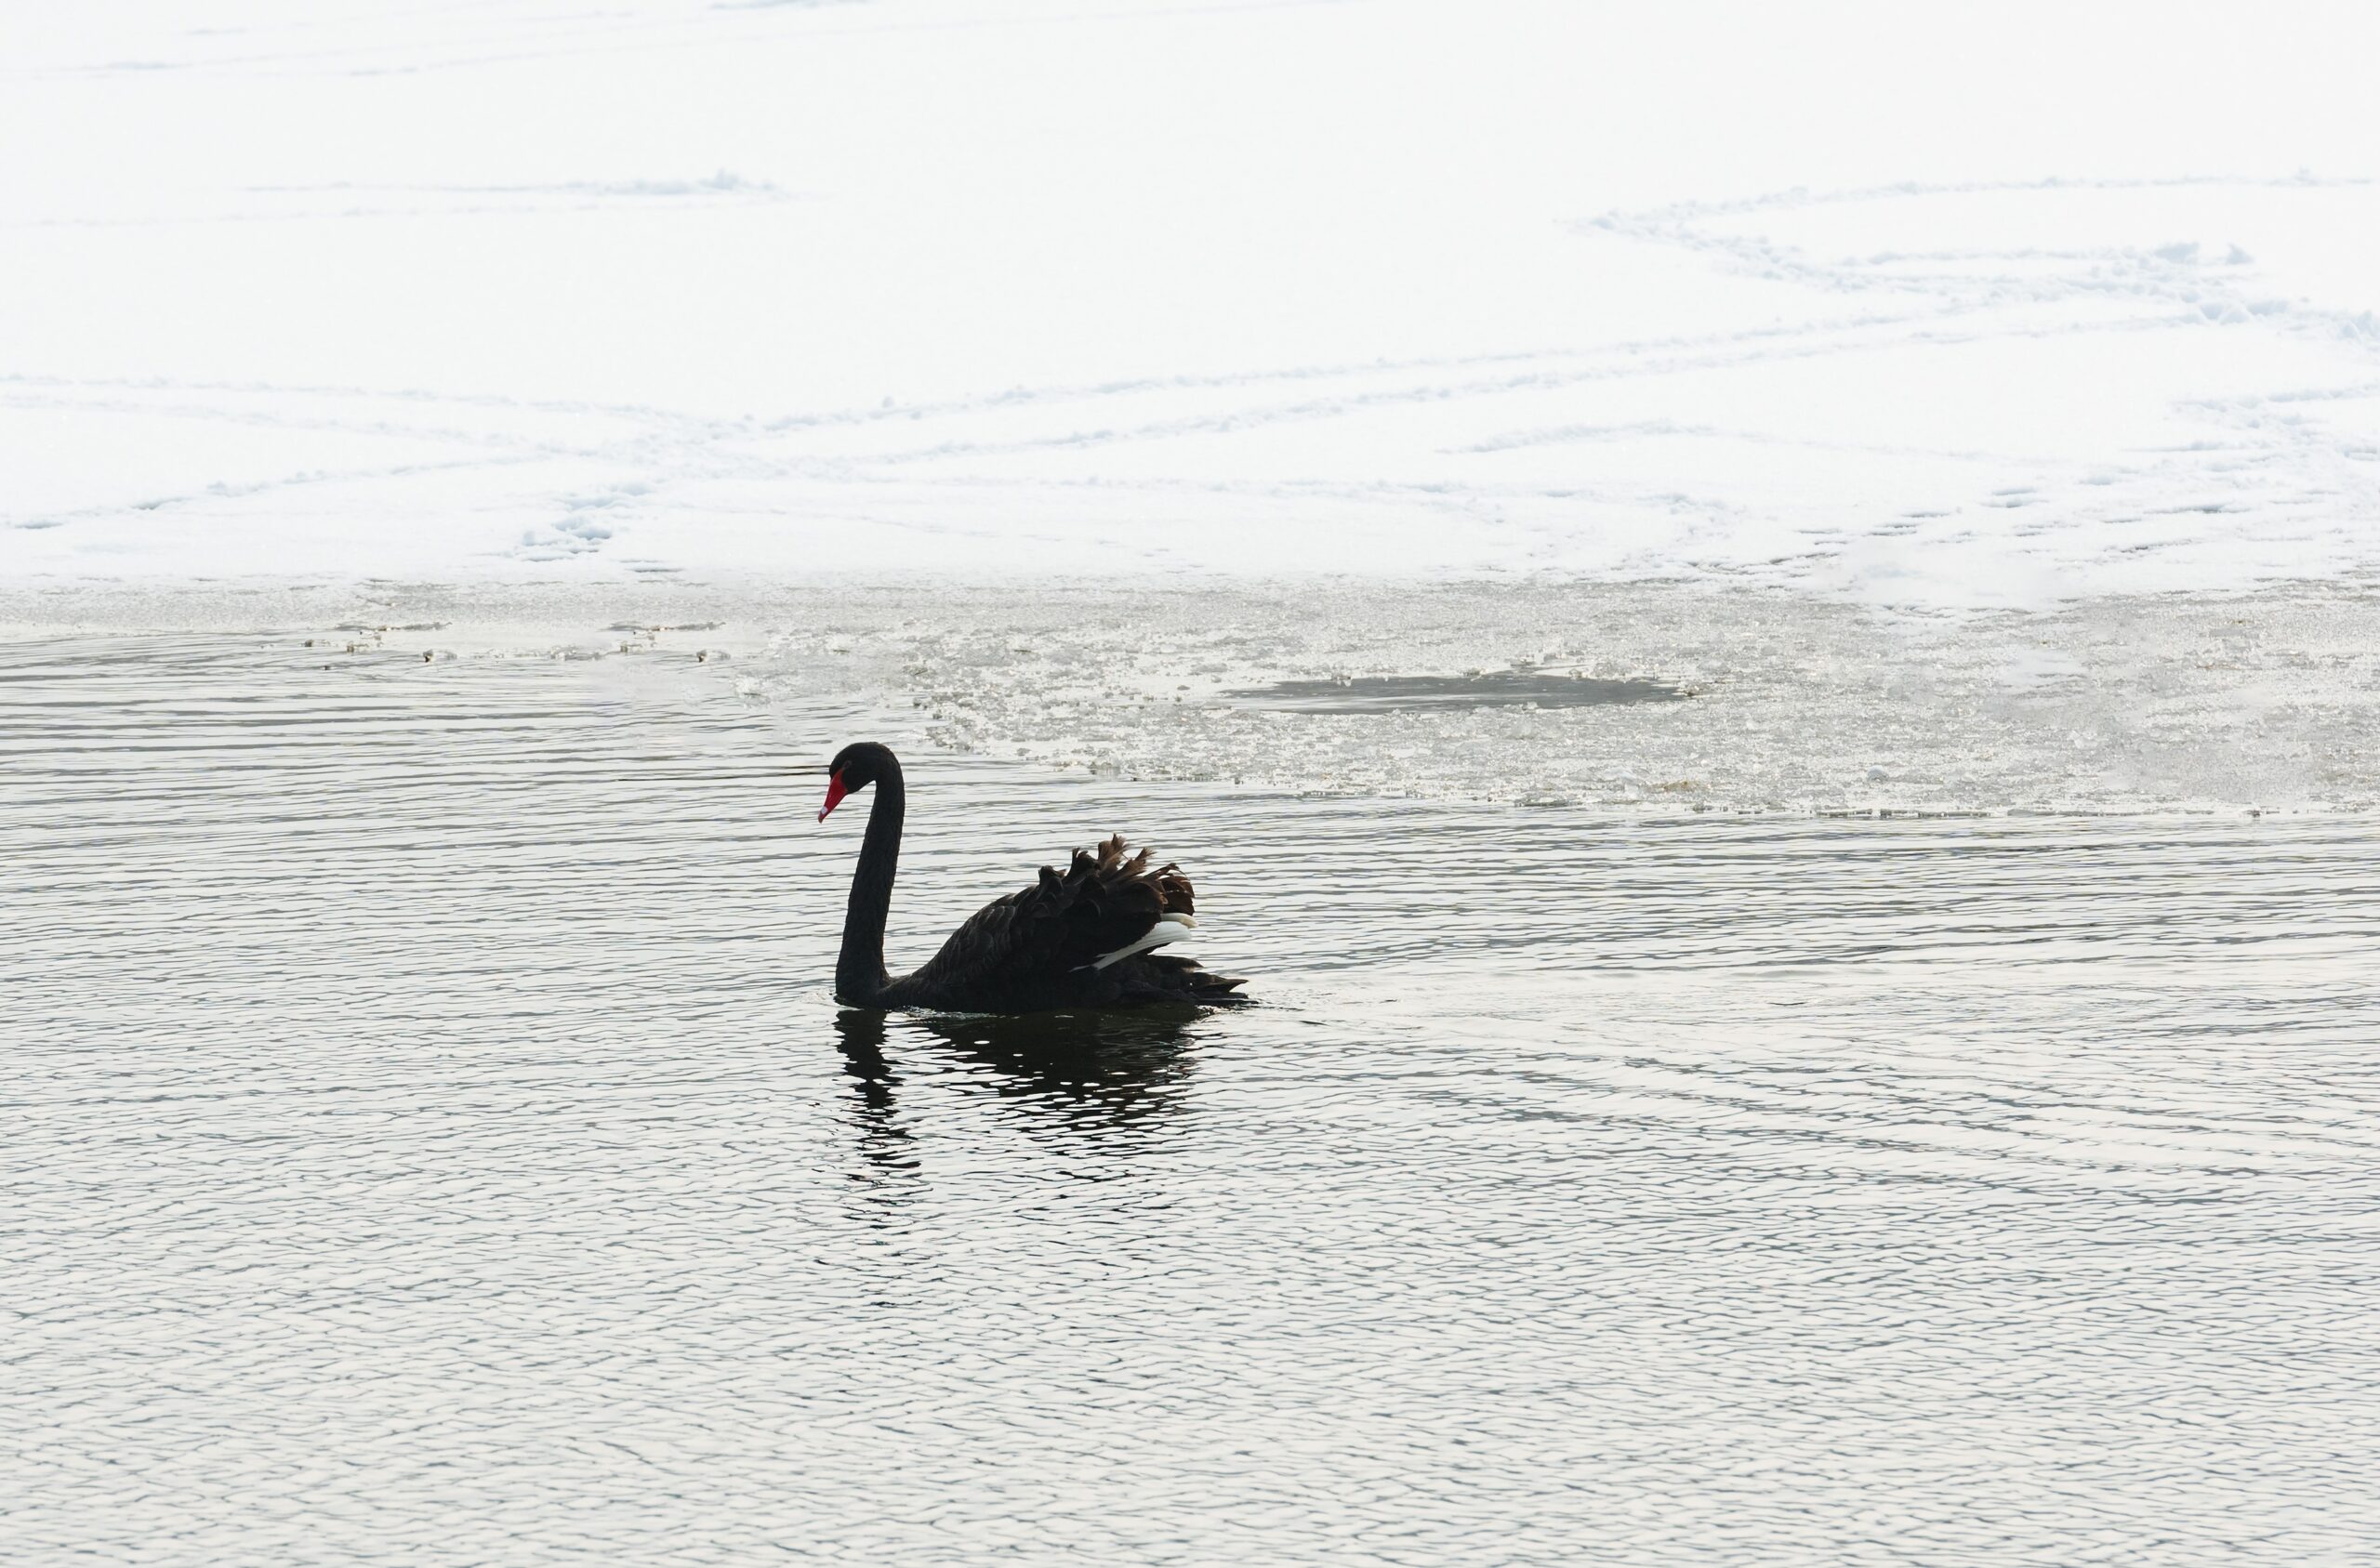 How I Learned to Stop Worrying and Love the Black Swan